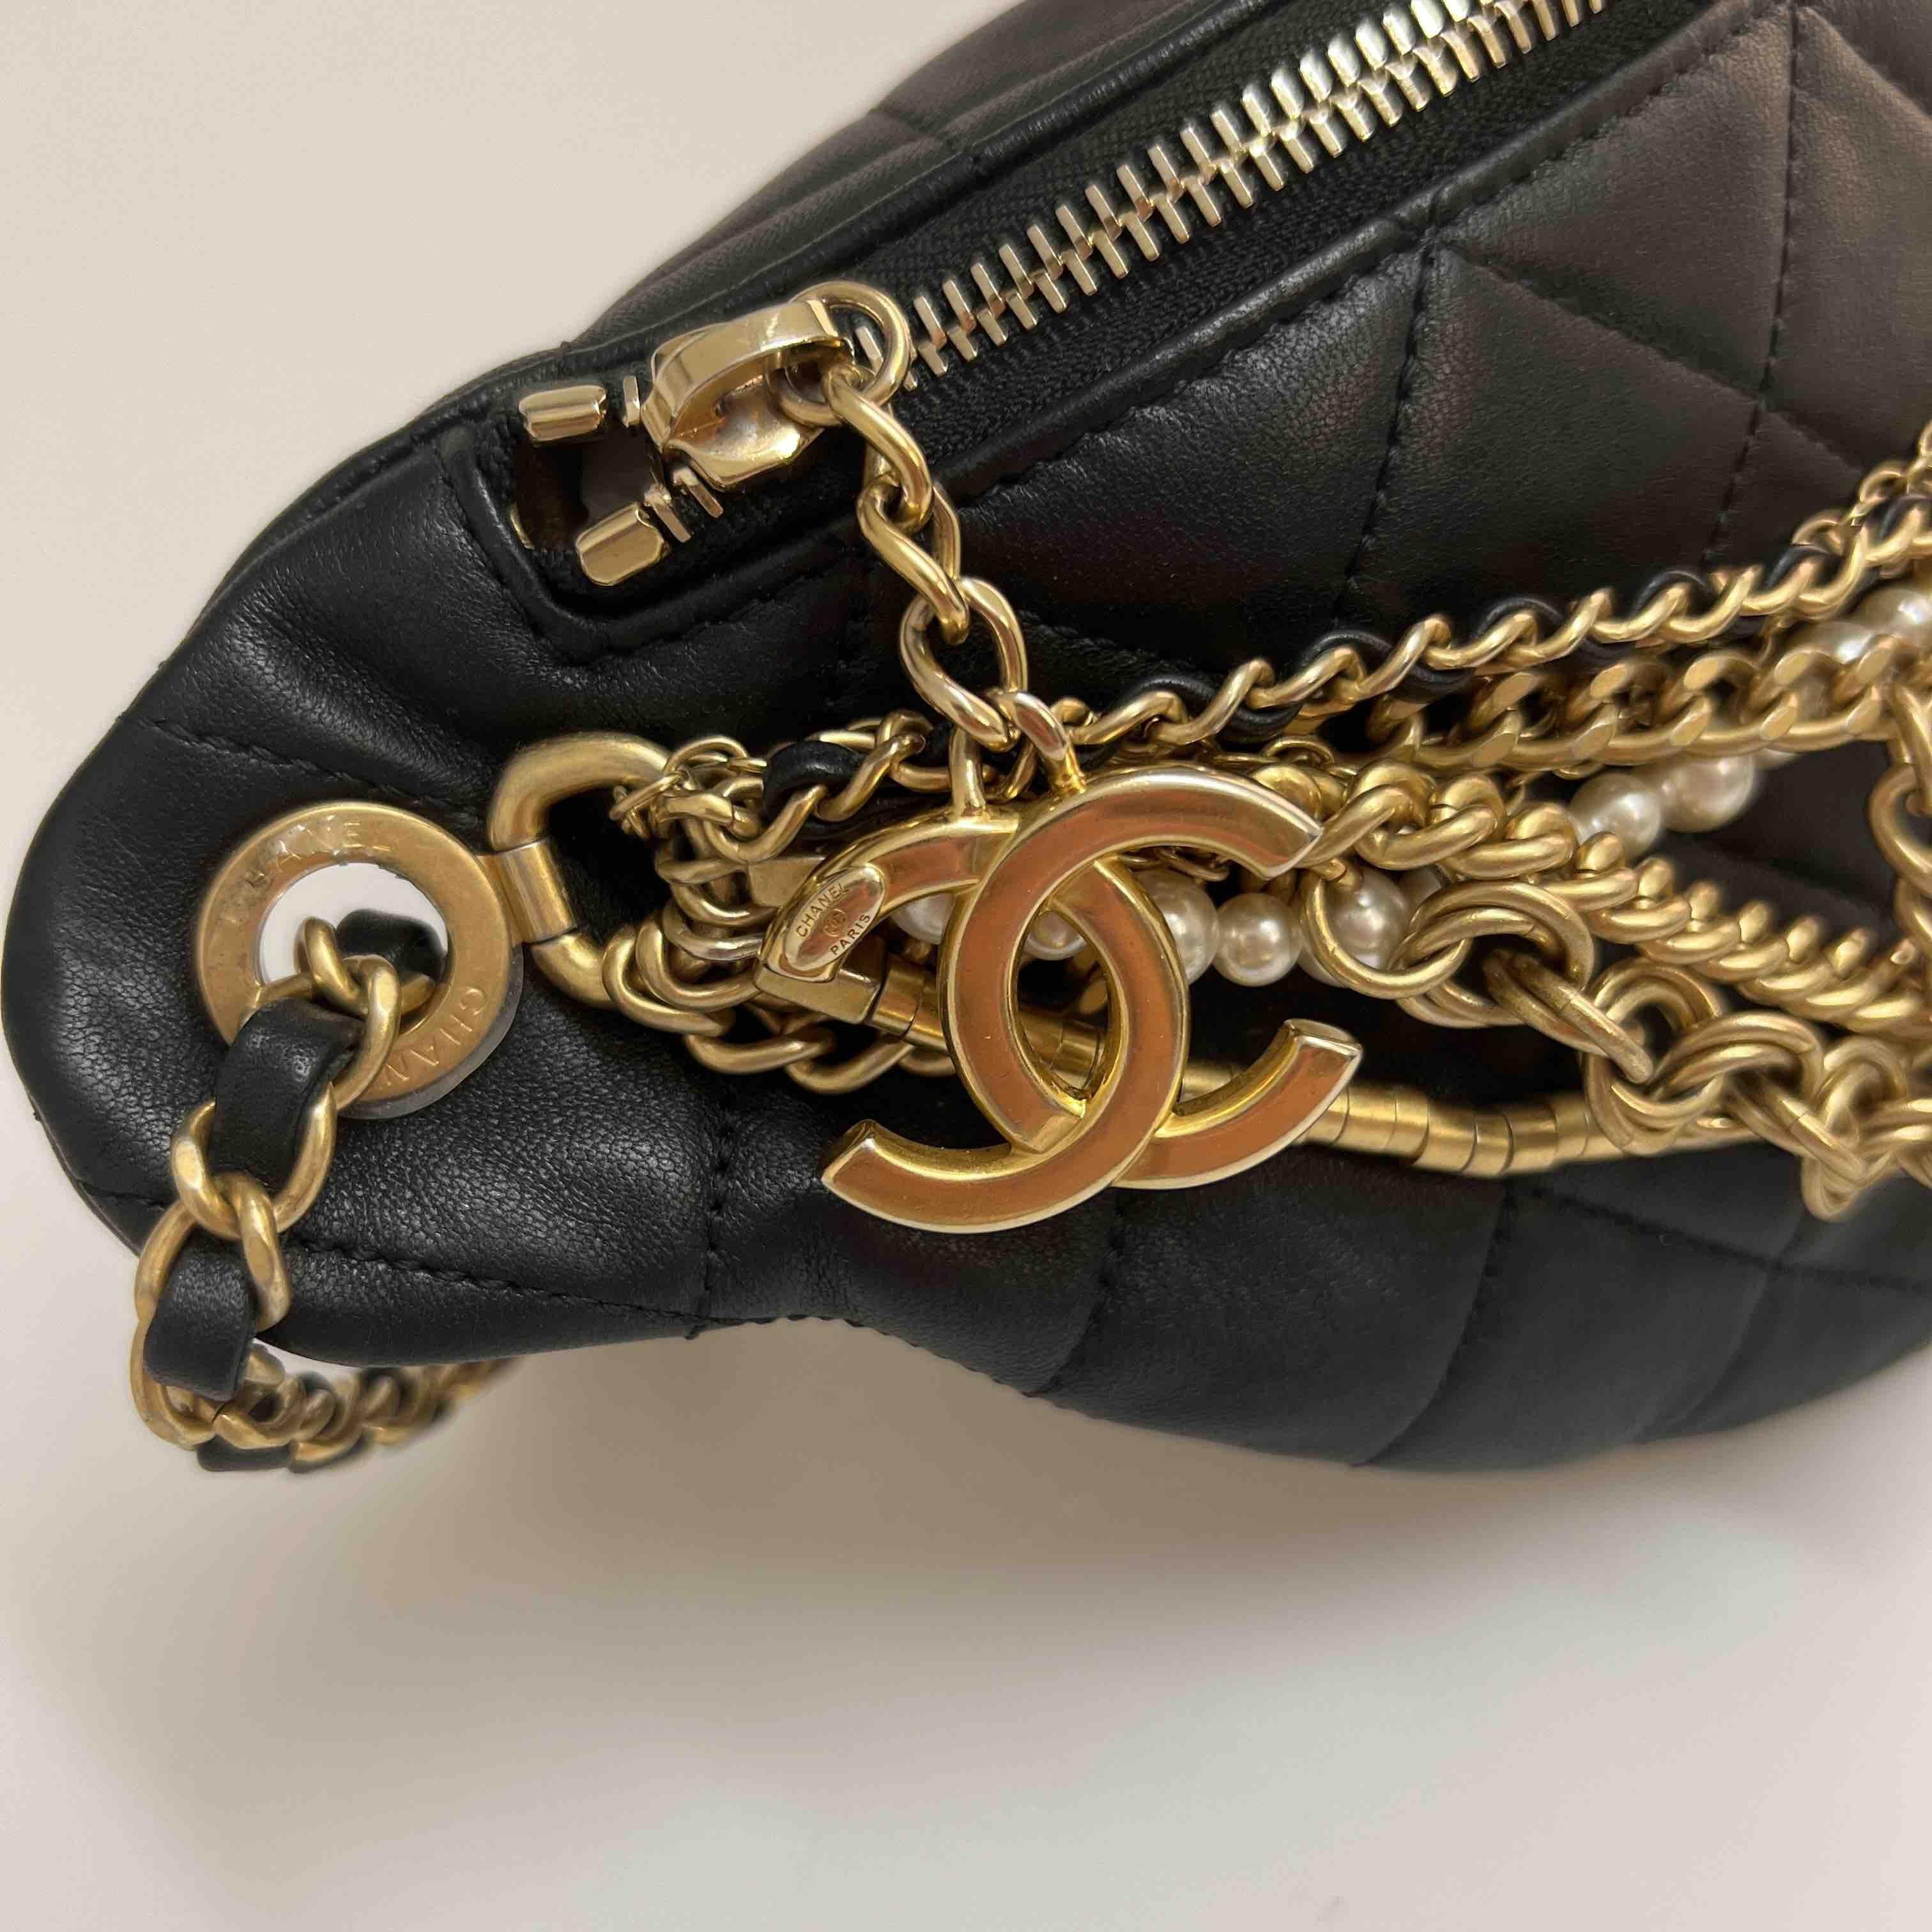 CHANEL Banana Belt Bag in Black Quilted Leather 1